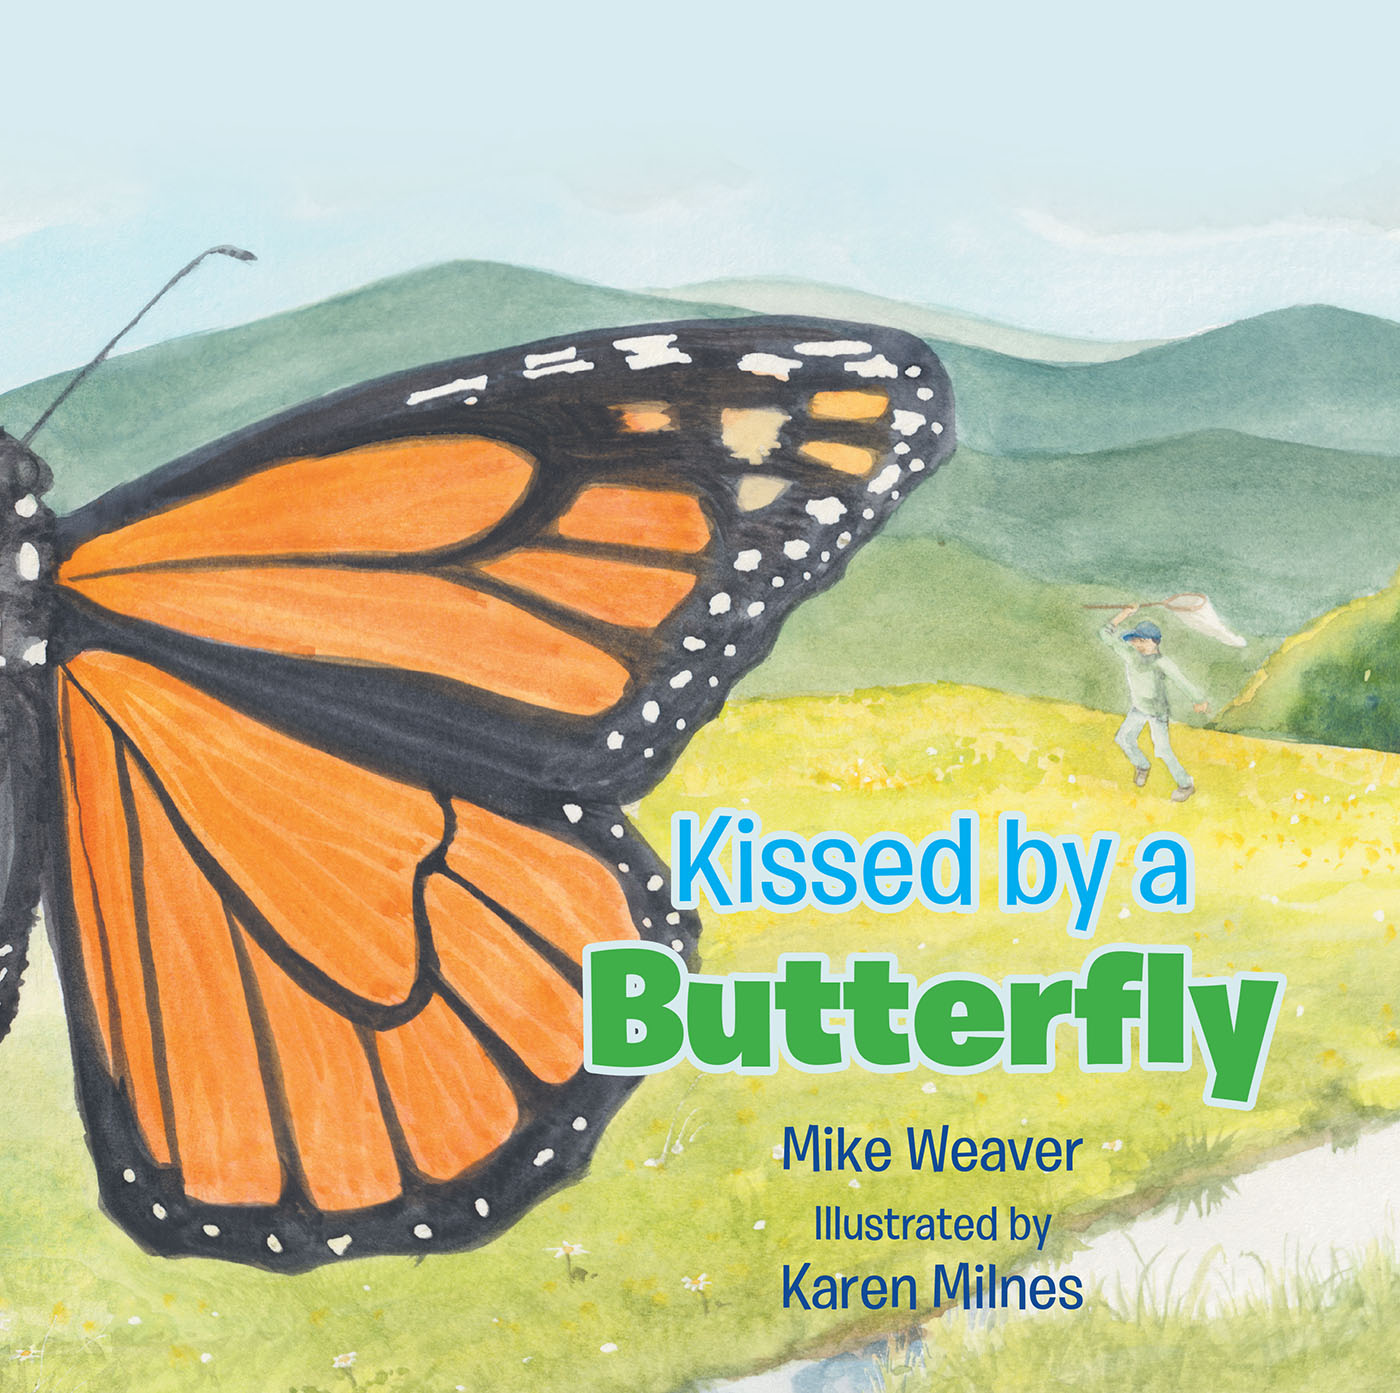 Mike Weaver’s Newly Released "Kissed by a Butterfly" is a Vibrant Celebration of the Natural World and the Need to Explore It